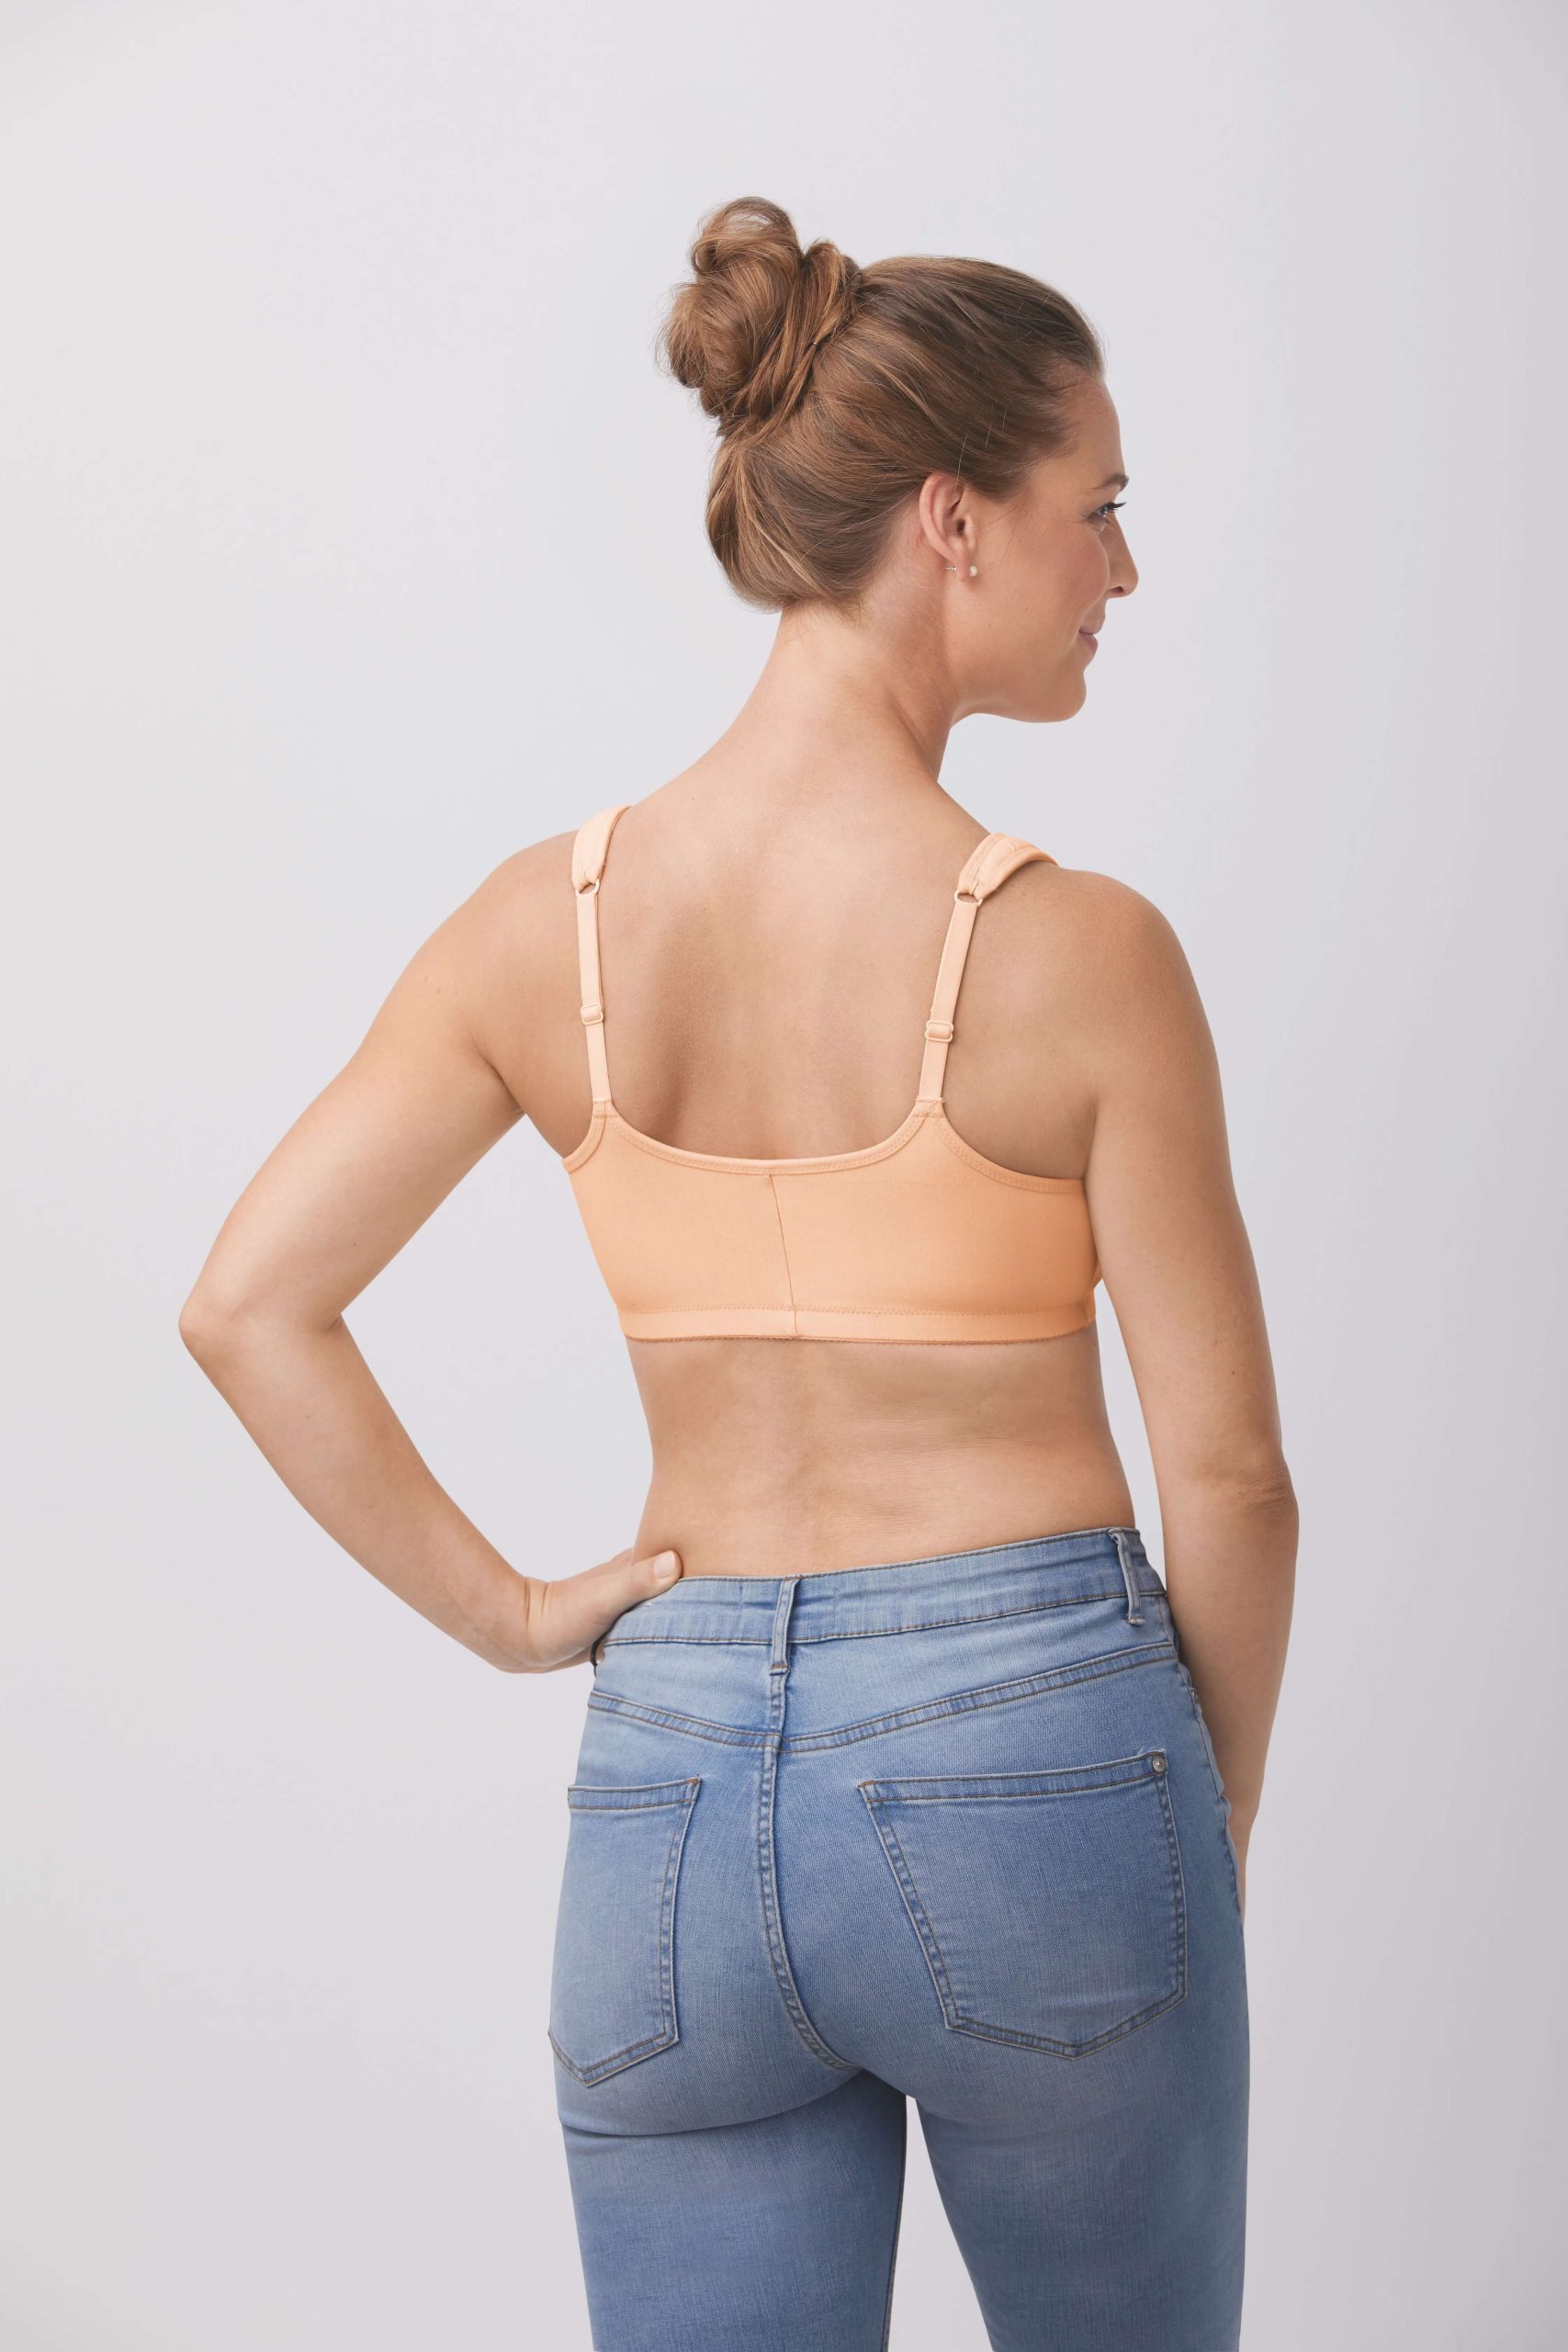 Mastectomy Garments Frontier Access & Mobility